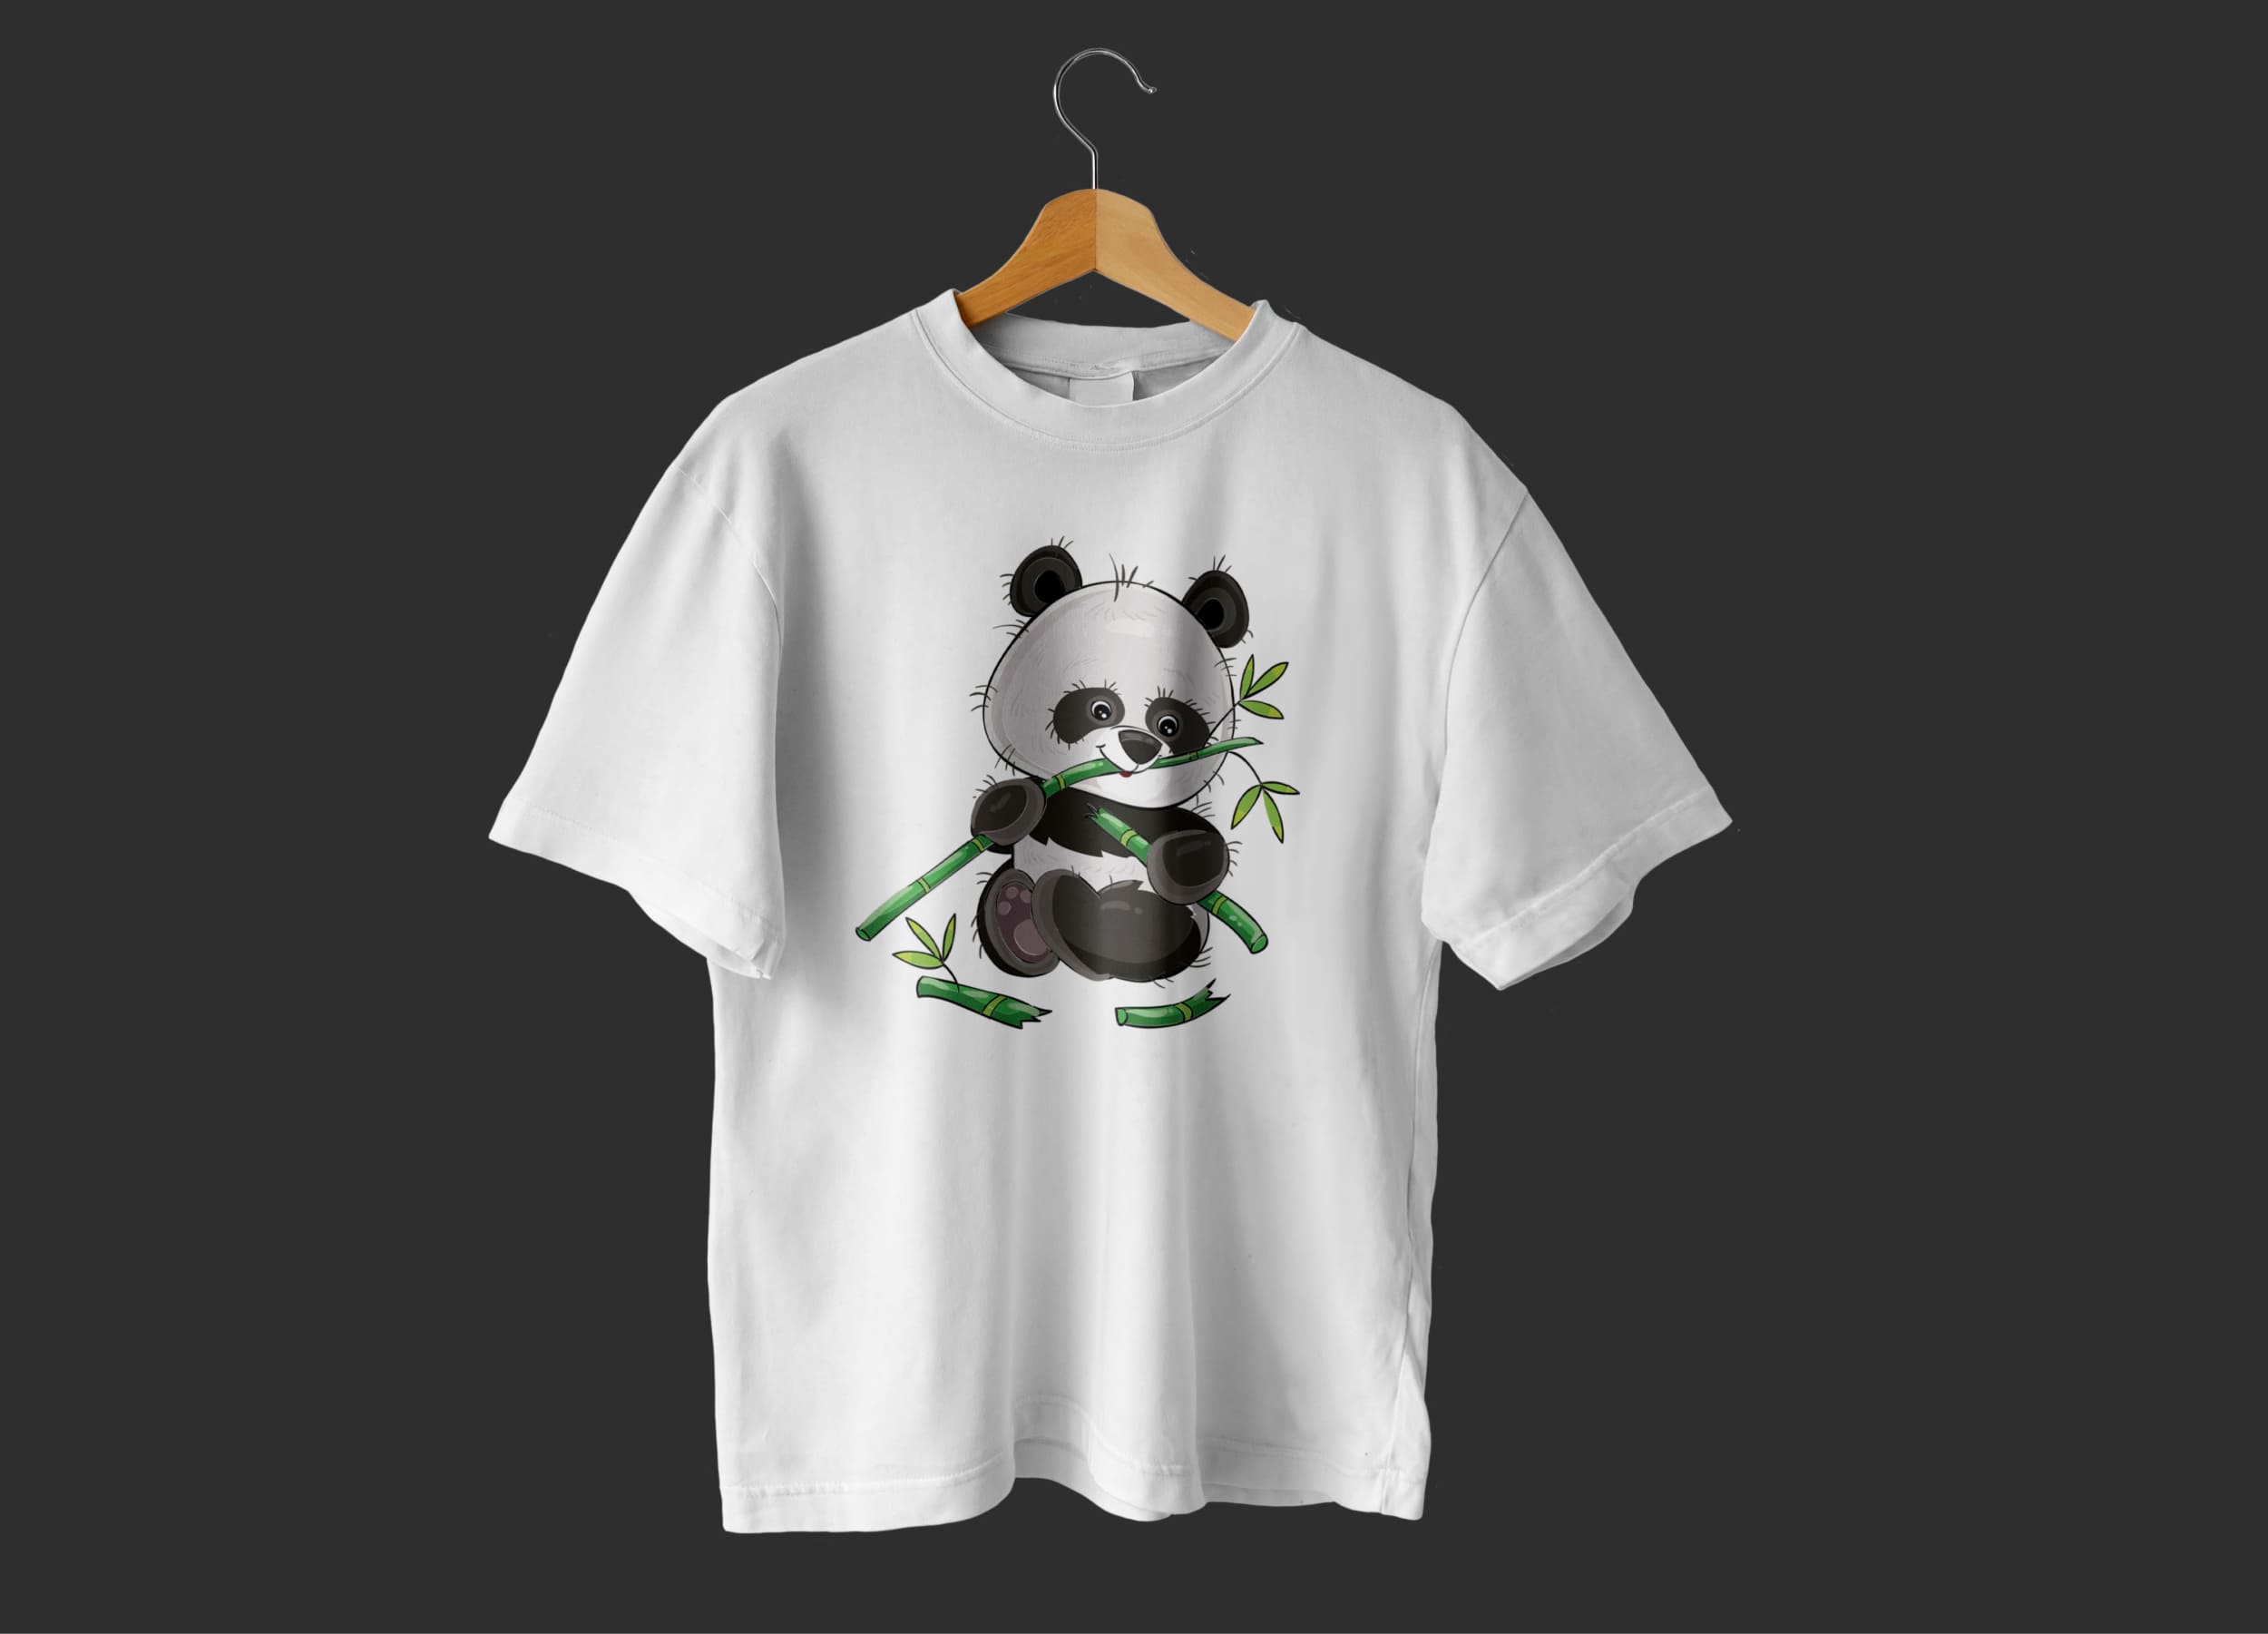 A white t-shirt with a baby panda gnawing on a branch on a wooden hanger on a dark gray background.